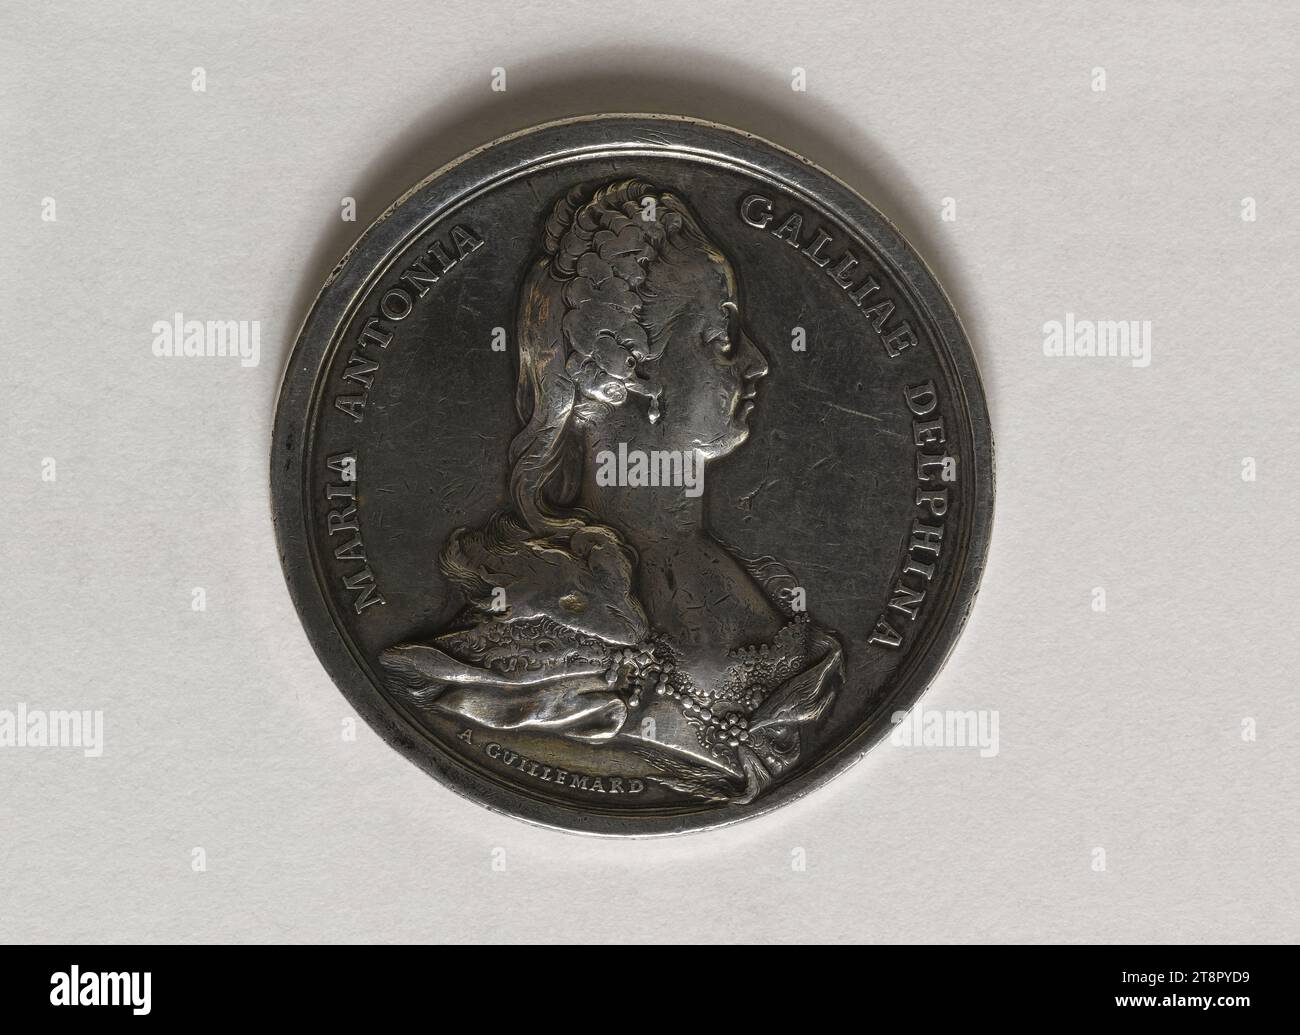 Marie-Antoinette's stay in Gunzburg, April 29, 1770, König, Anton Friedrich, Medal Engraver, Guillemard, A., Medal Engraver, Array, Numismatic, Medal, Dimensions - Work: Diameter: 4.4 cm, Weight (type size): 34.96 g Stock Photo